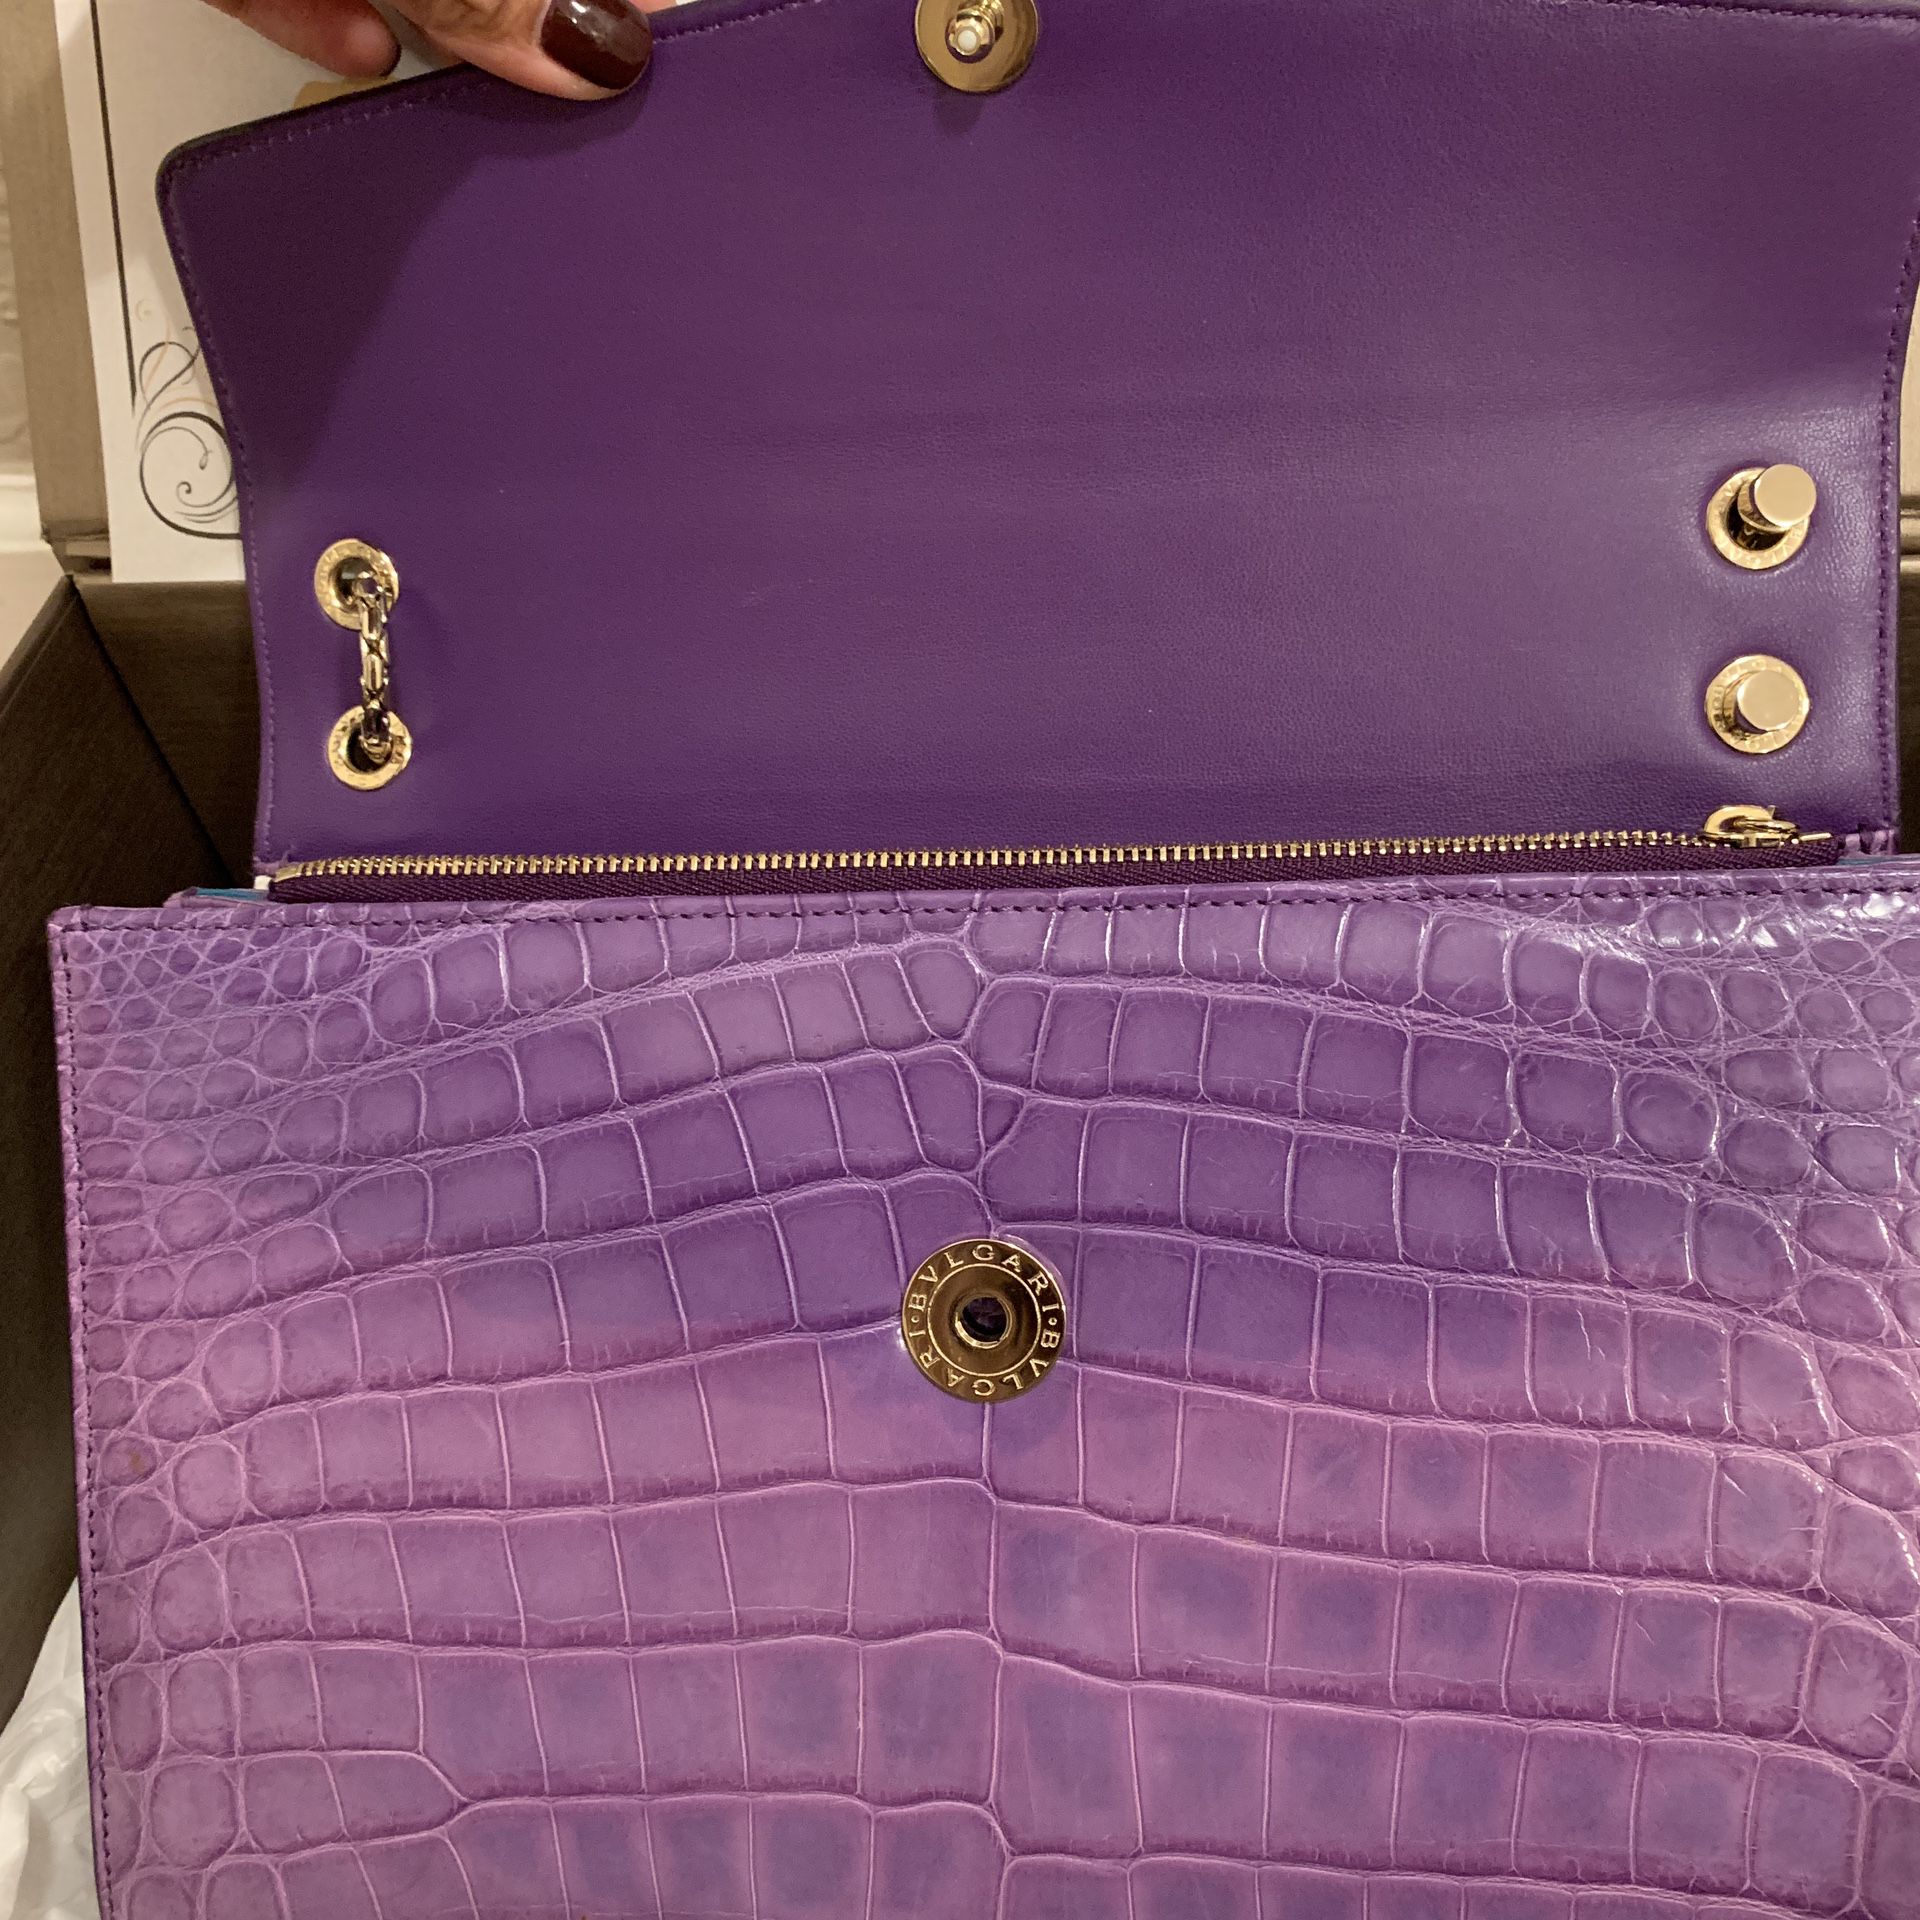 BVLGARI Clutch/Purse for Sale in Bronx, NY - OfferUp